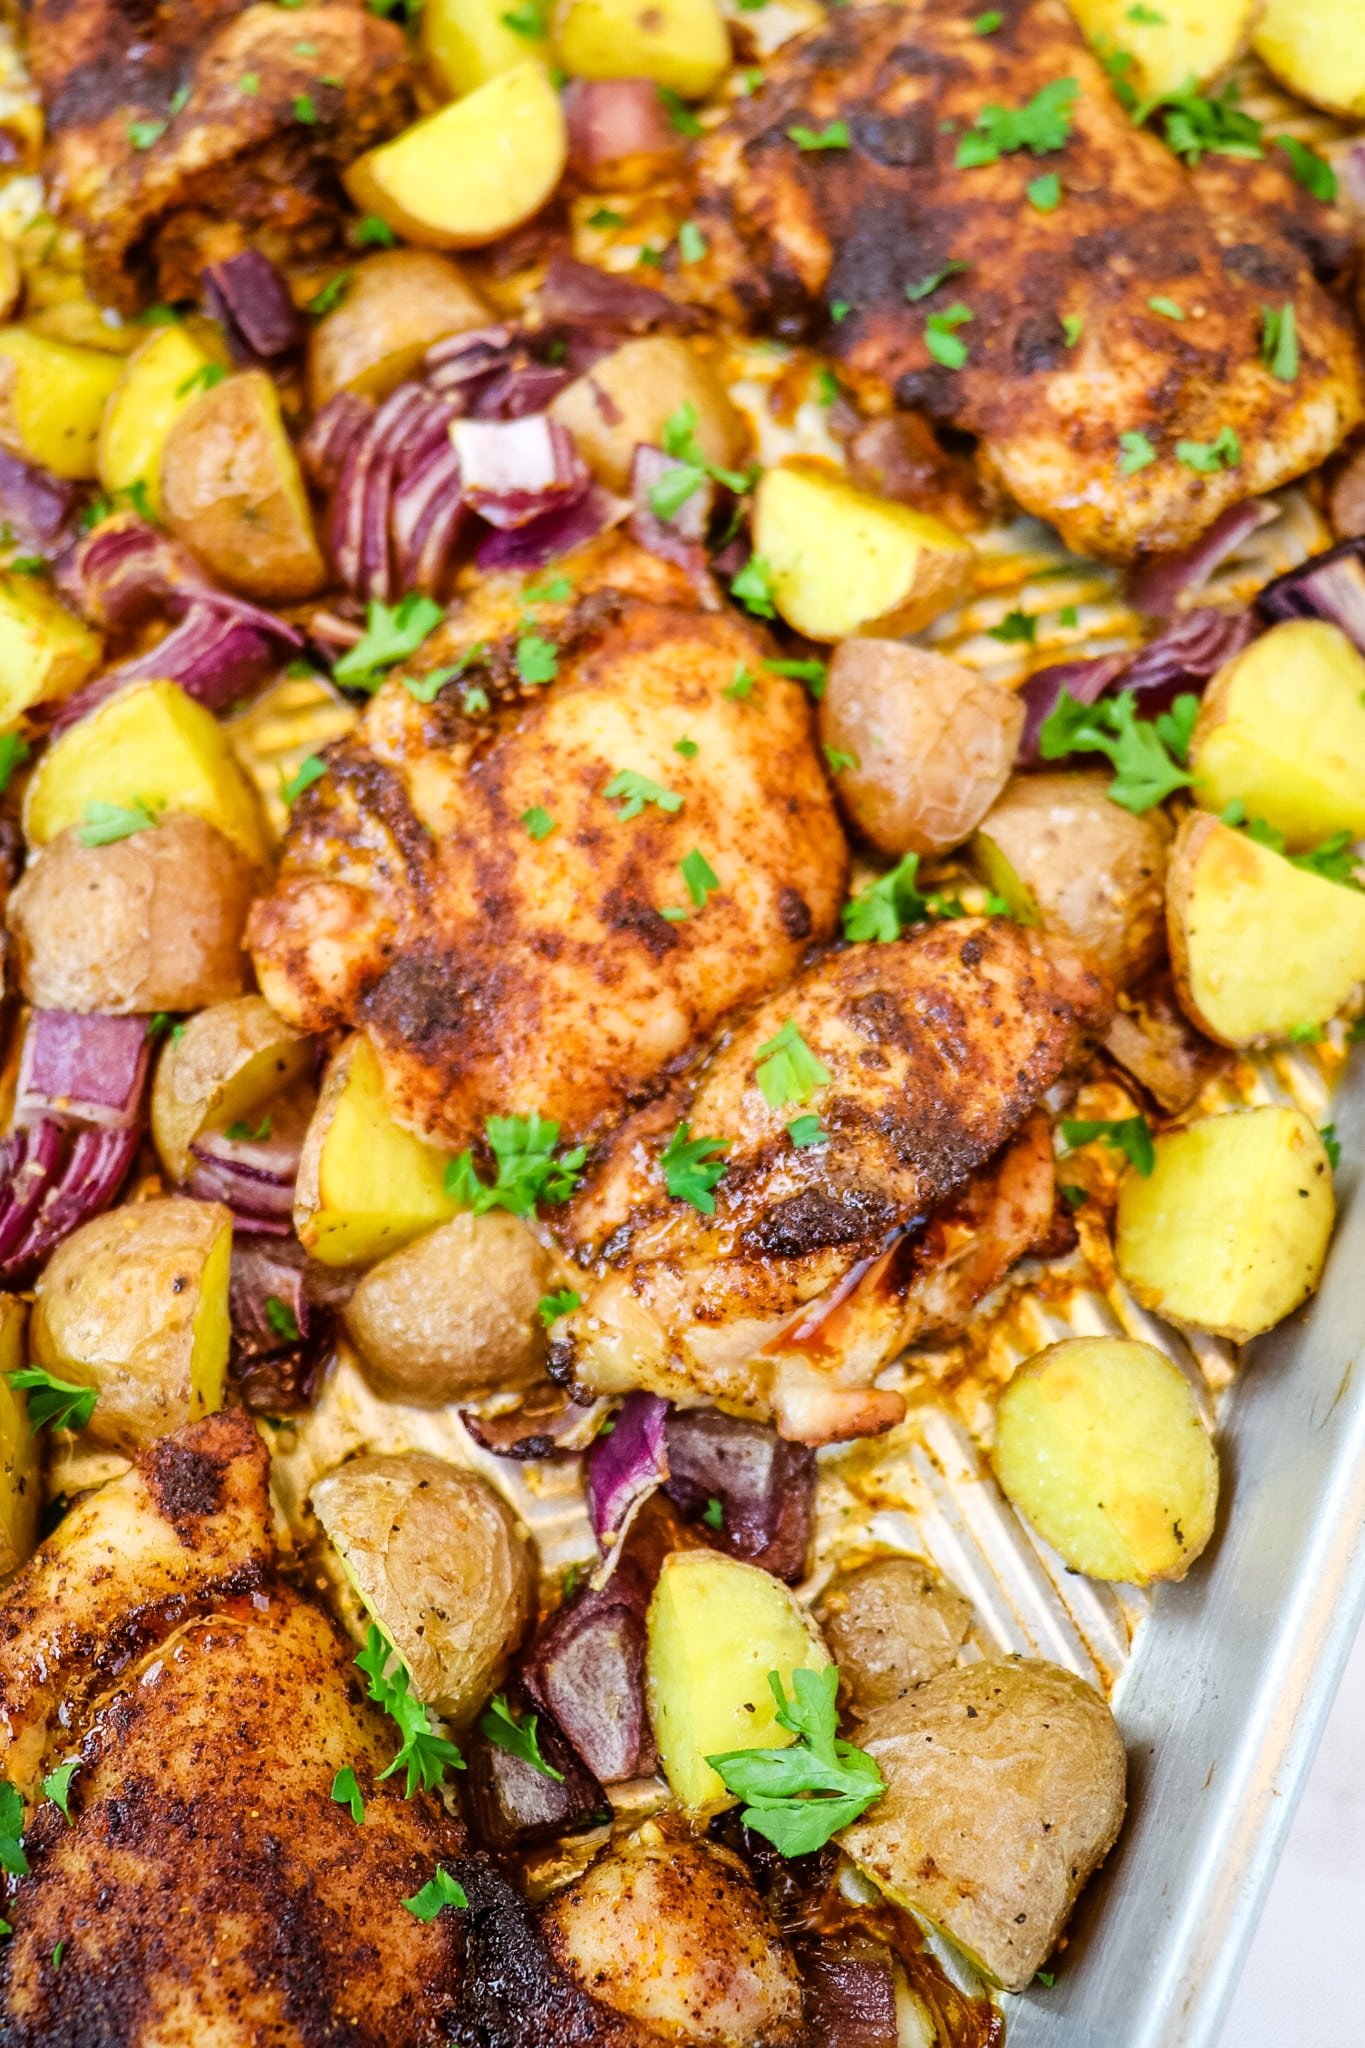 Roasted chicken thighs and potatoes on sheet pan topped with chopped parsley.